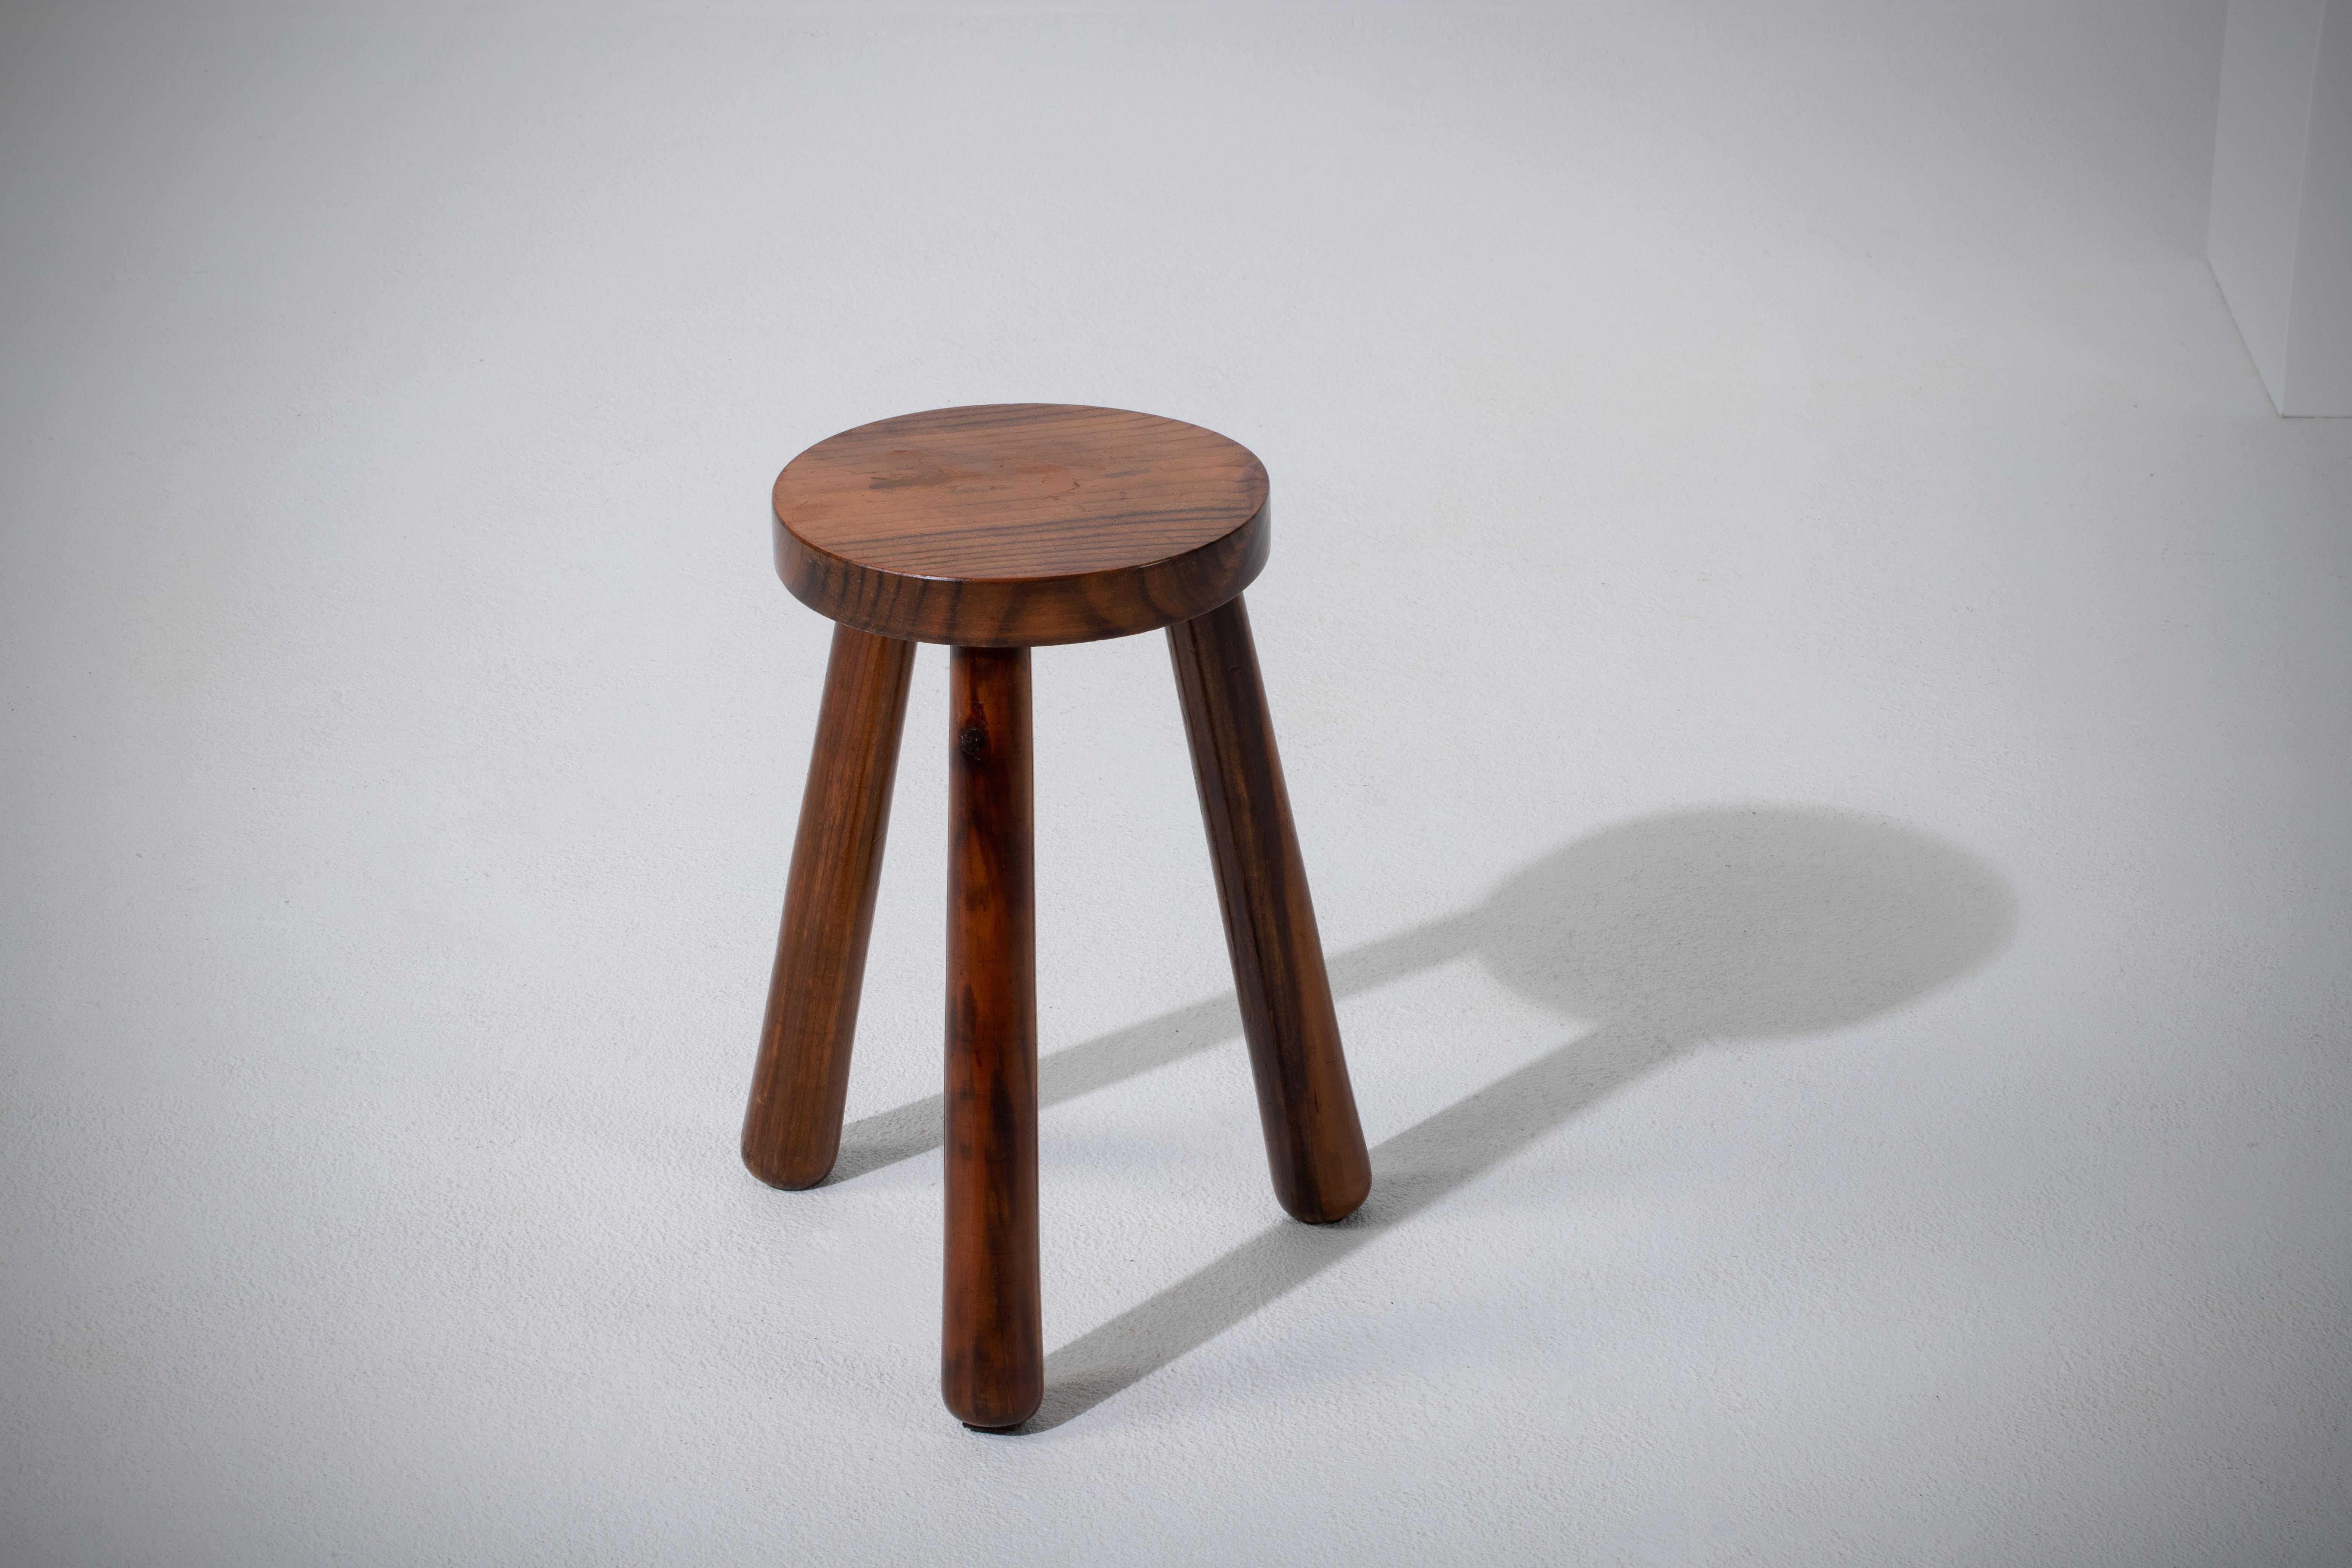 Fantastic wood stool from France. Made in the 1960s, without hardware. Lovely Vintage look.
Good vintage condition.